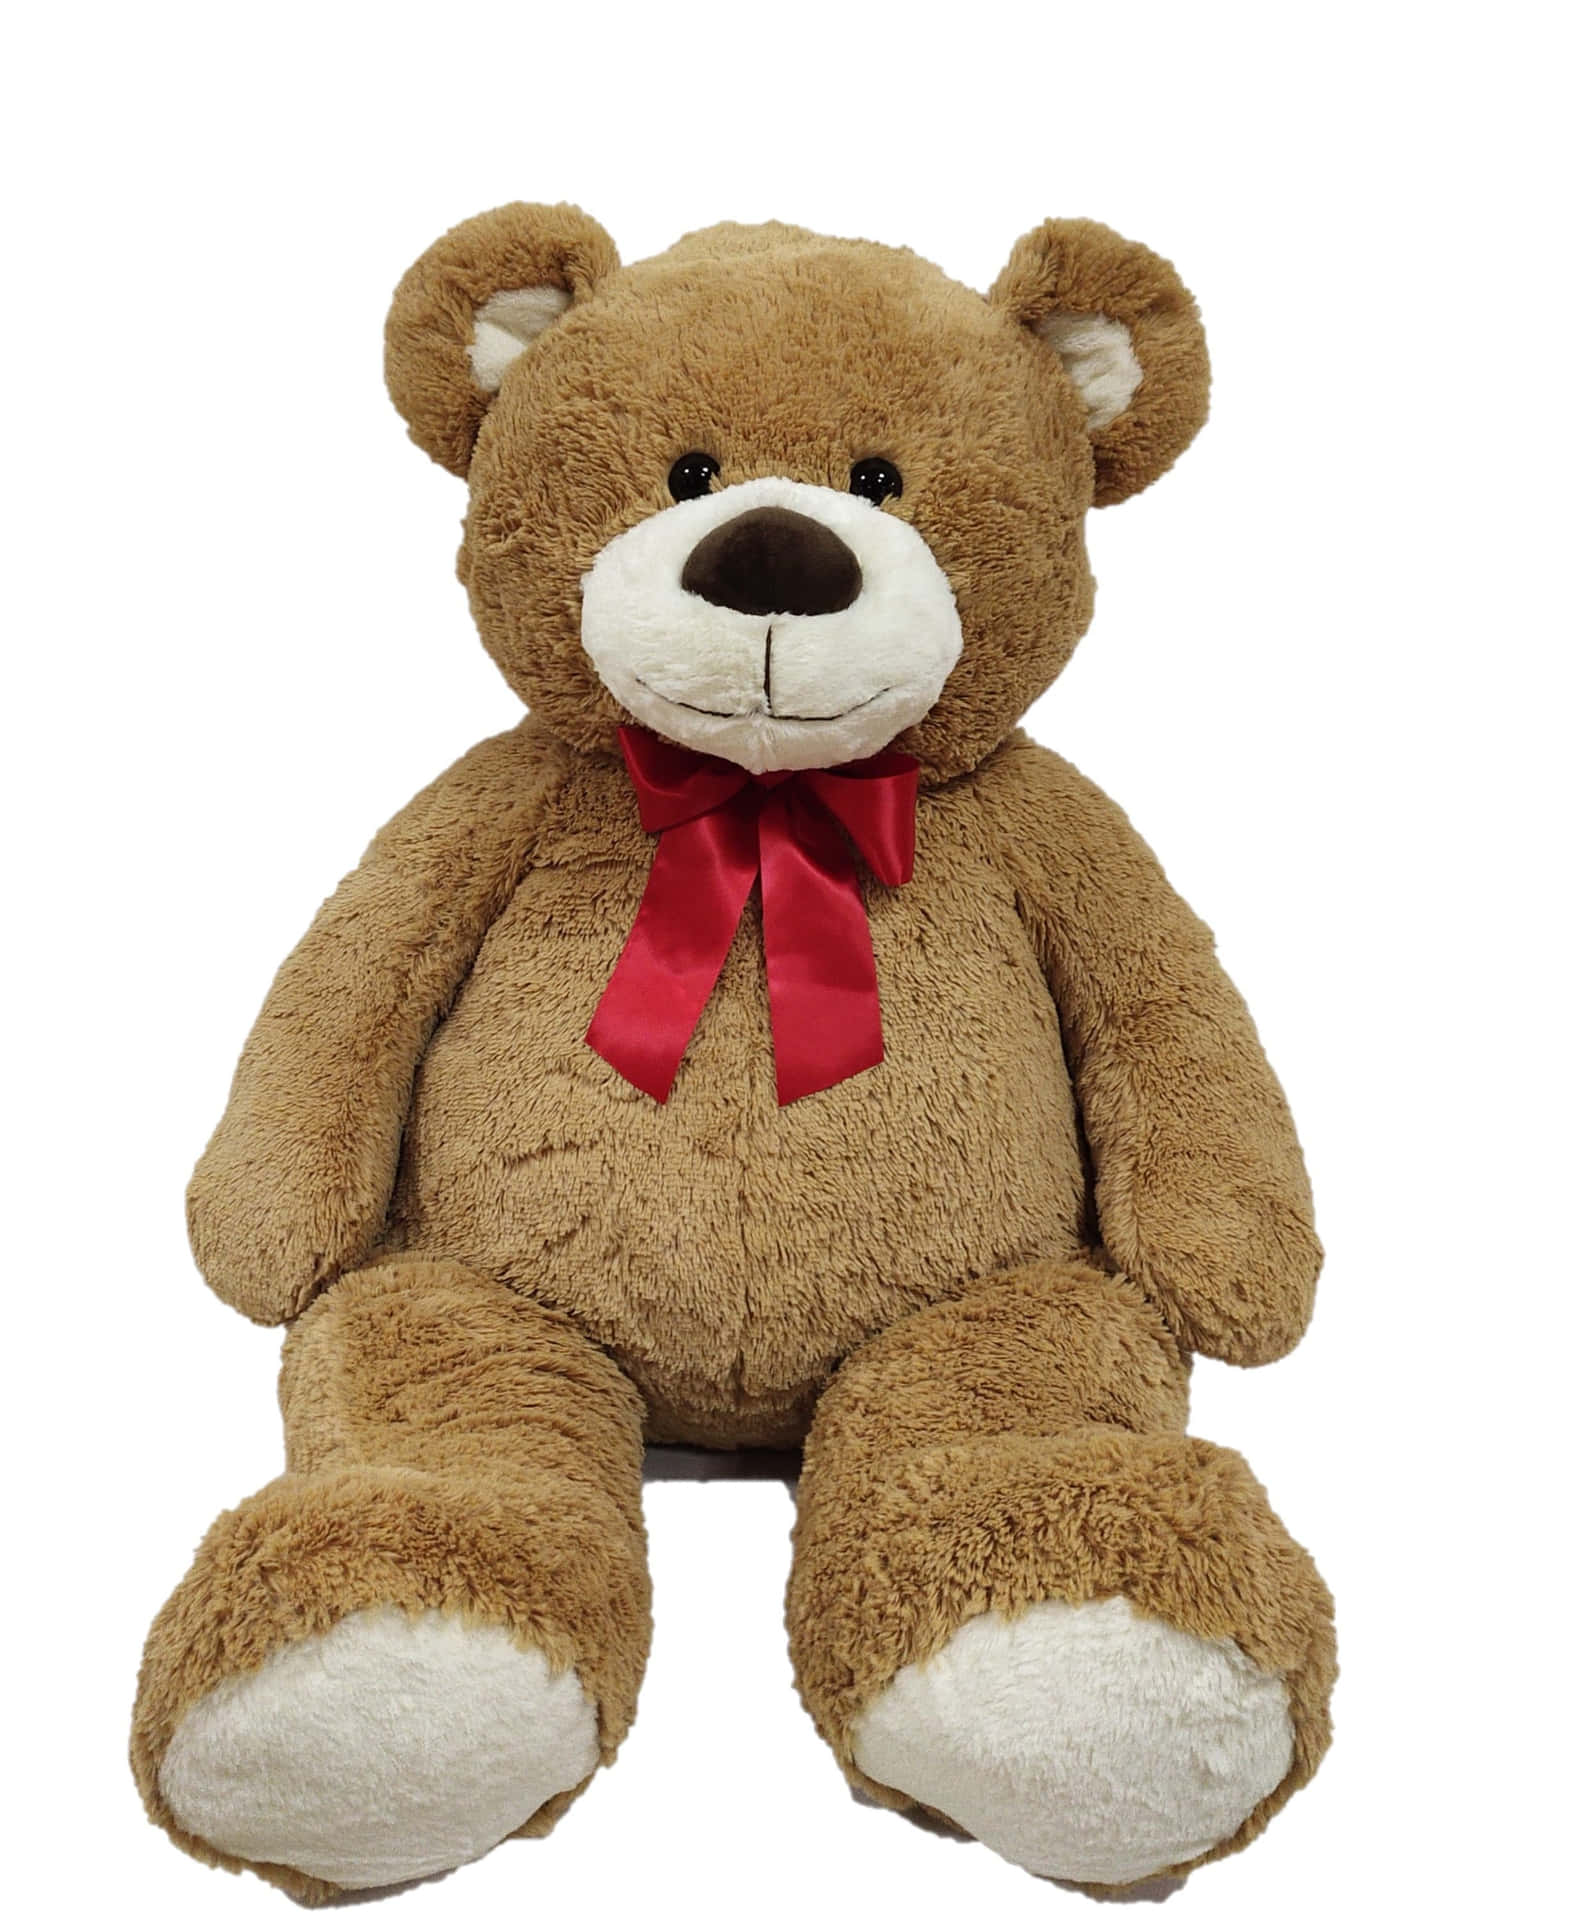 A Large Brown Teddy Bear With A Red Bow